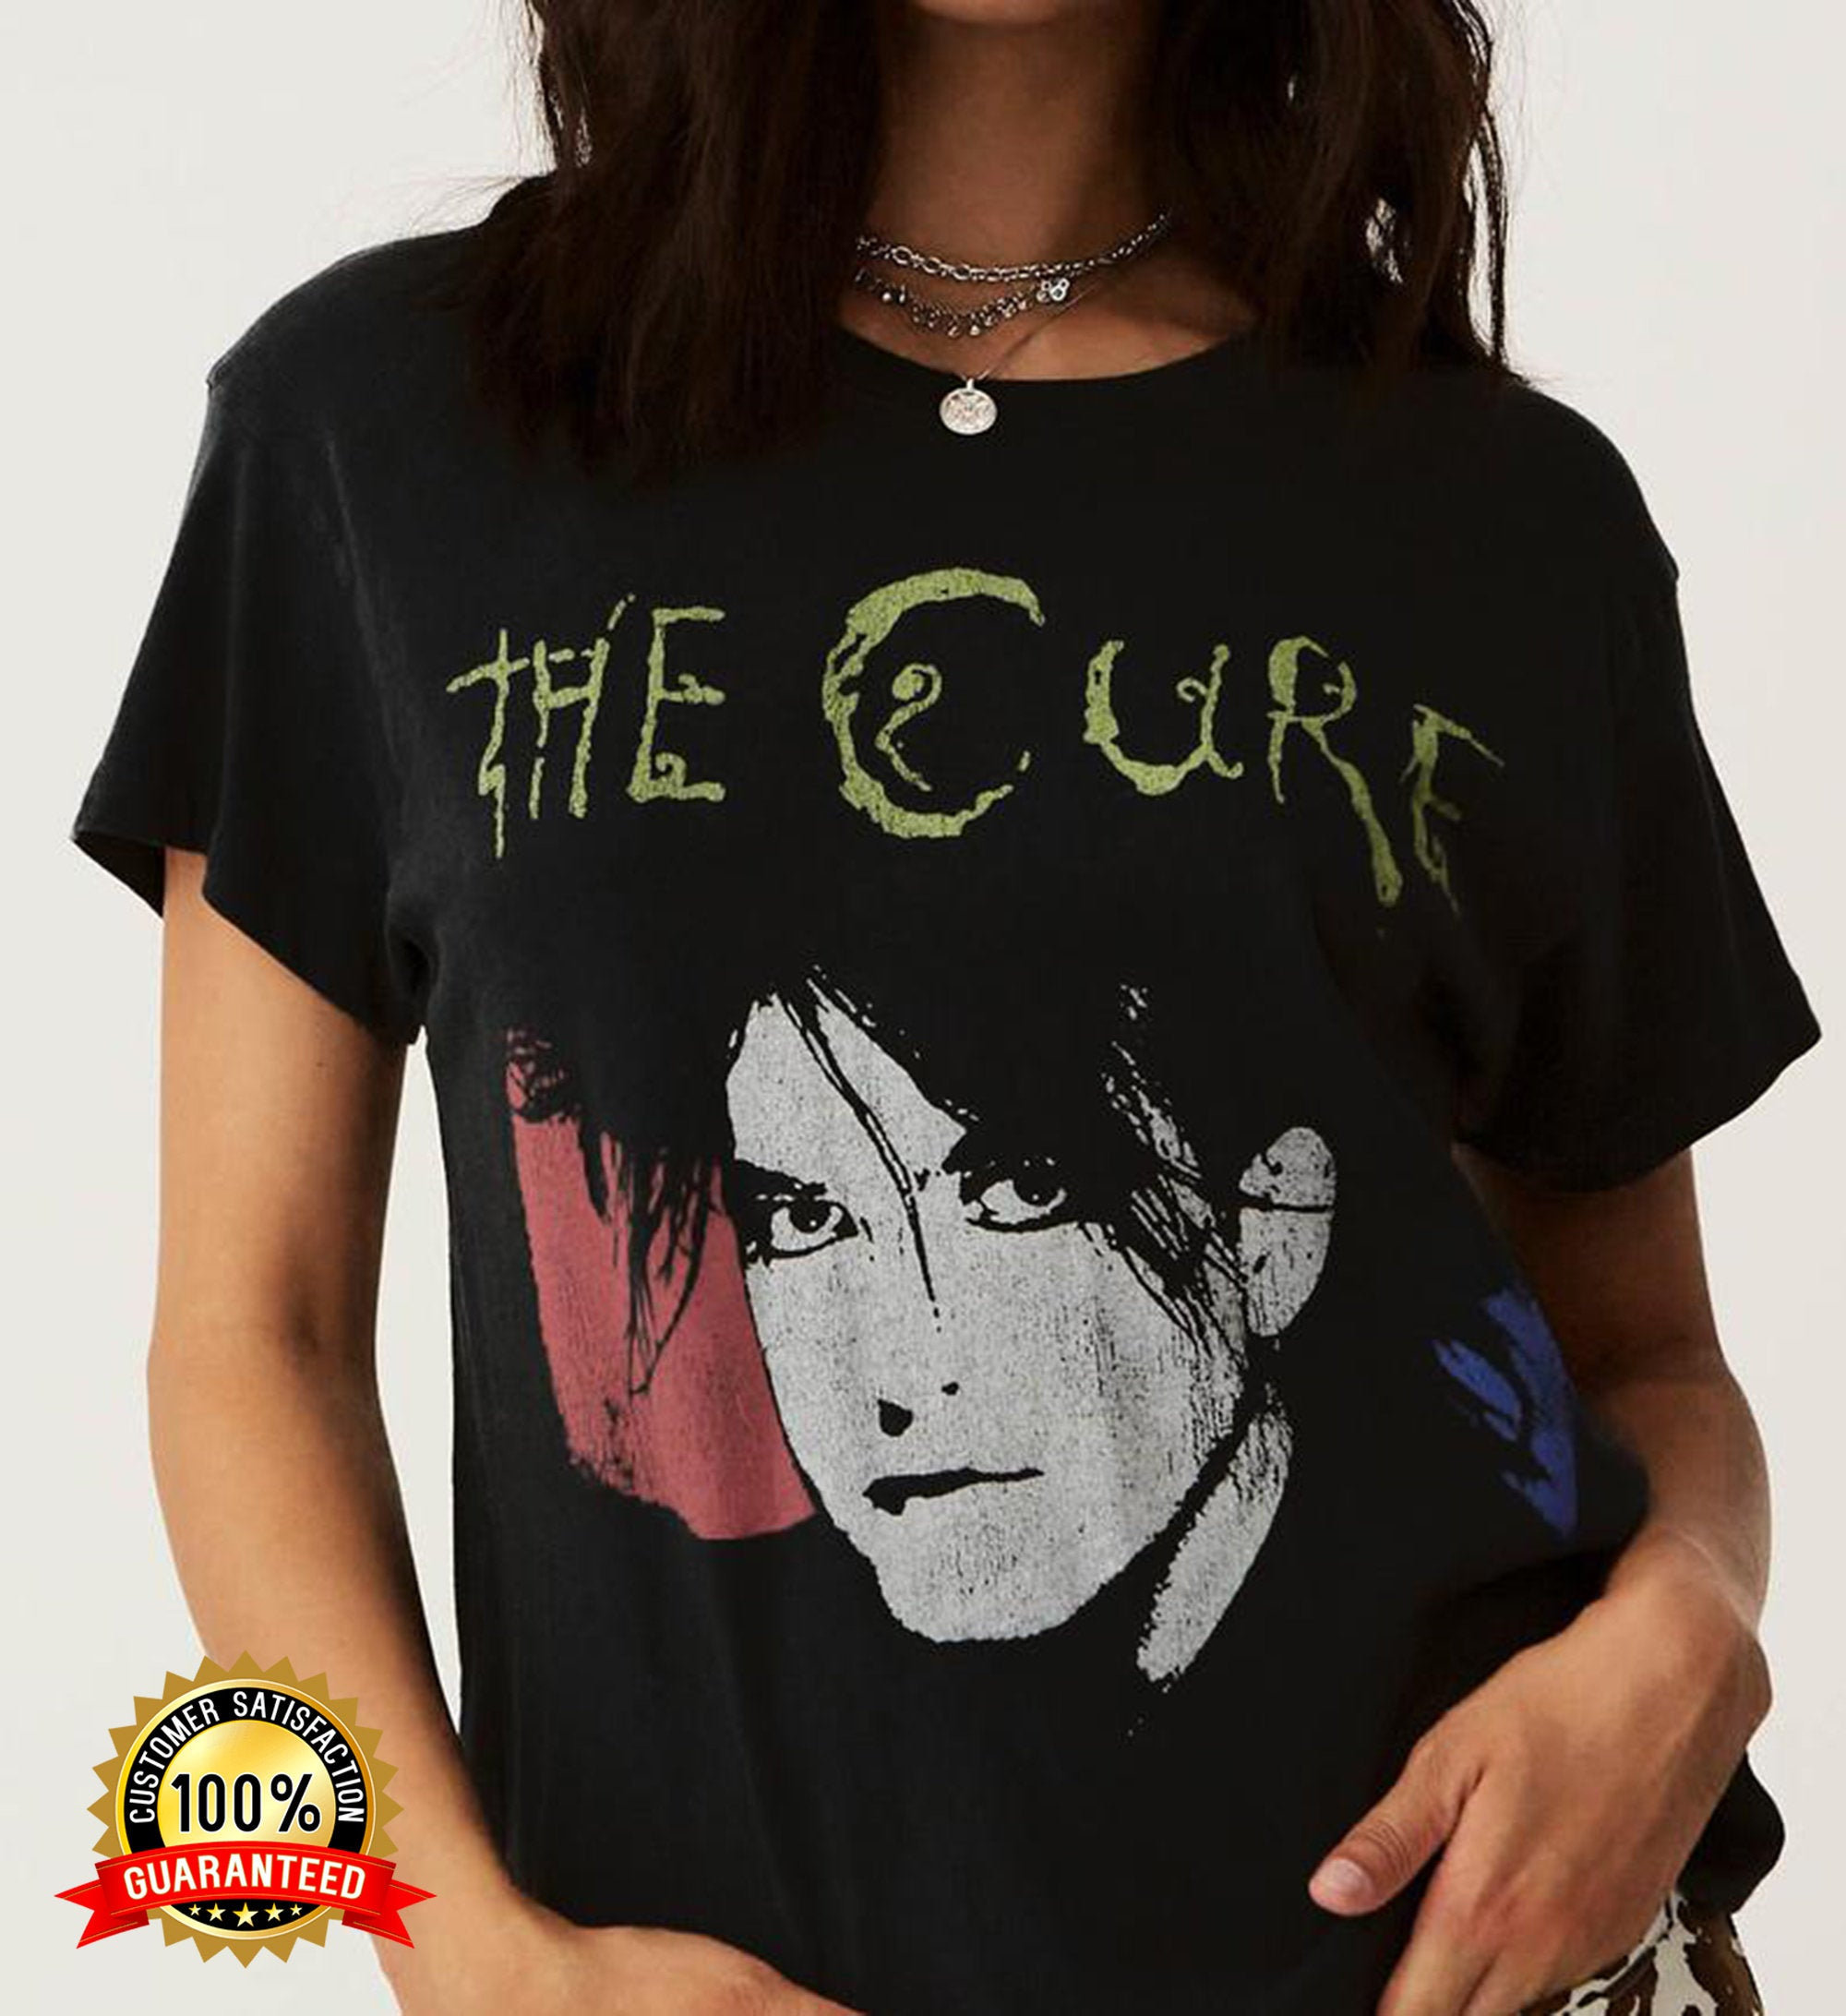 The Cure T-shirt,The Cure Another Day Tour Shirt,Vintage The Cure